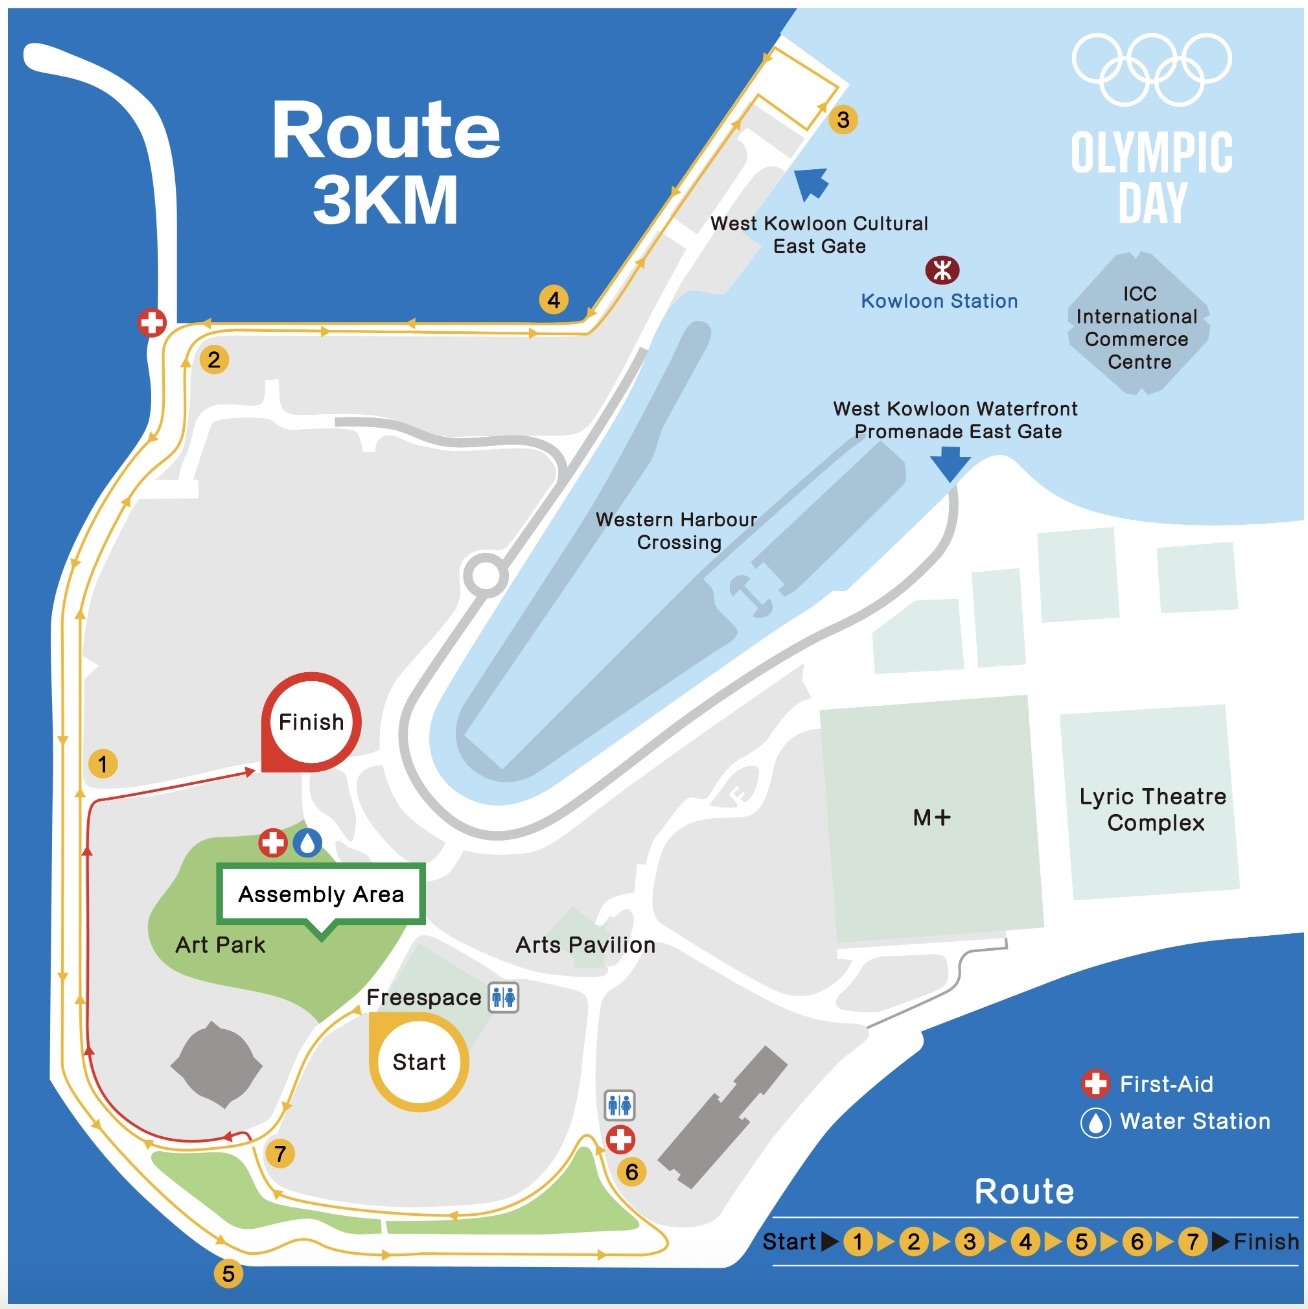 The race route for the 2023 Olympic Day Individual Run.